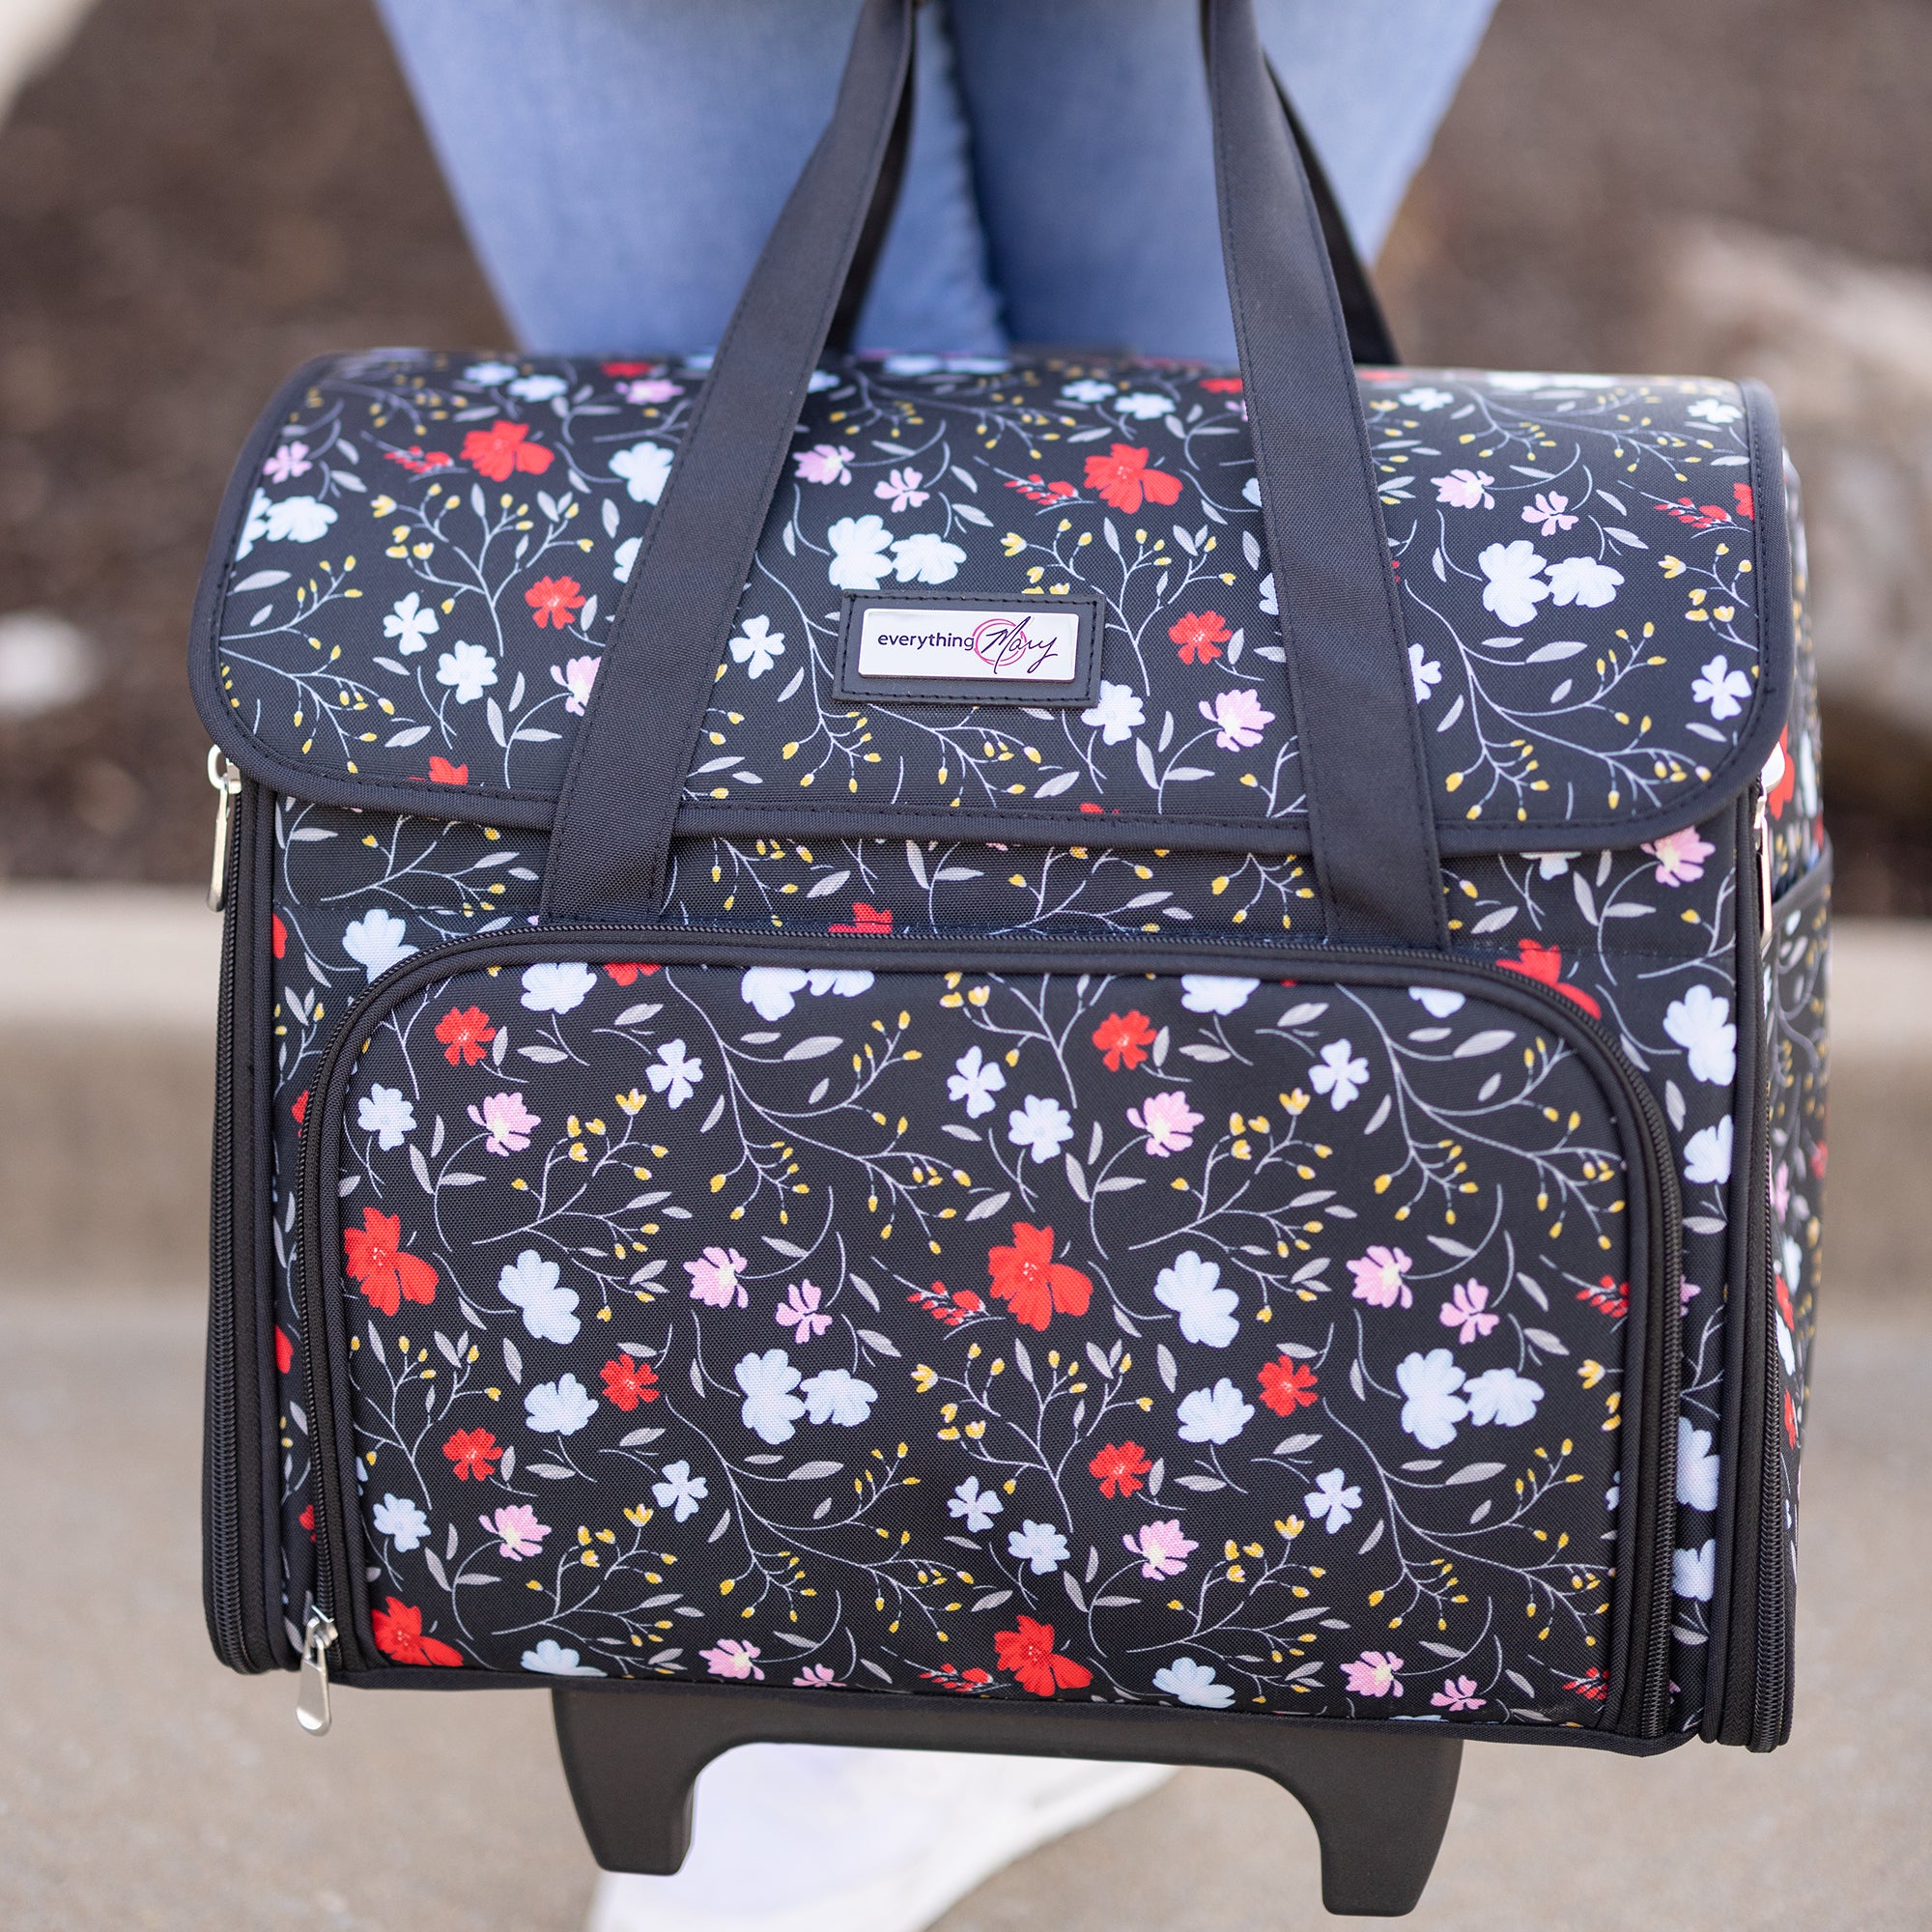 Teacher Rolling Tote, Black Floral - Everything Mary